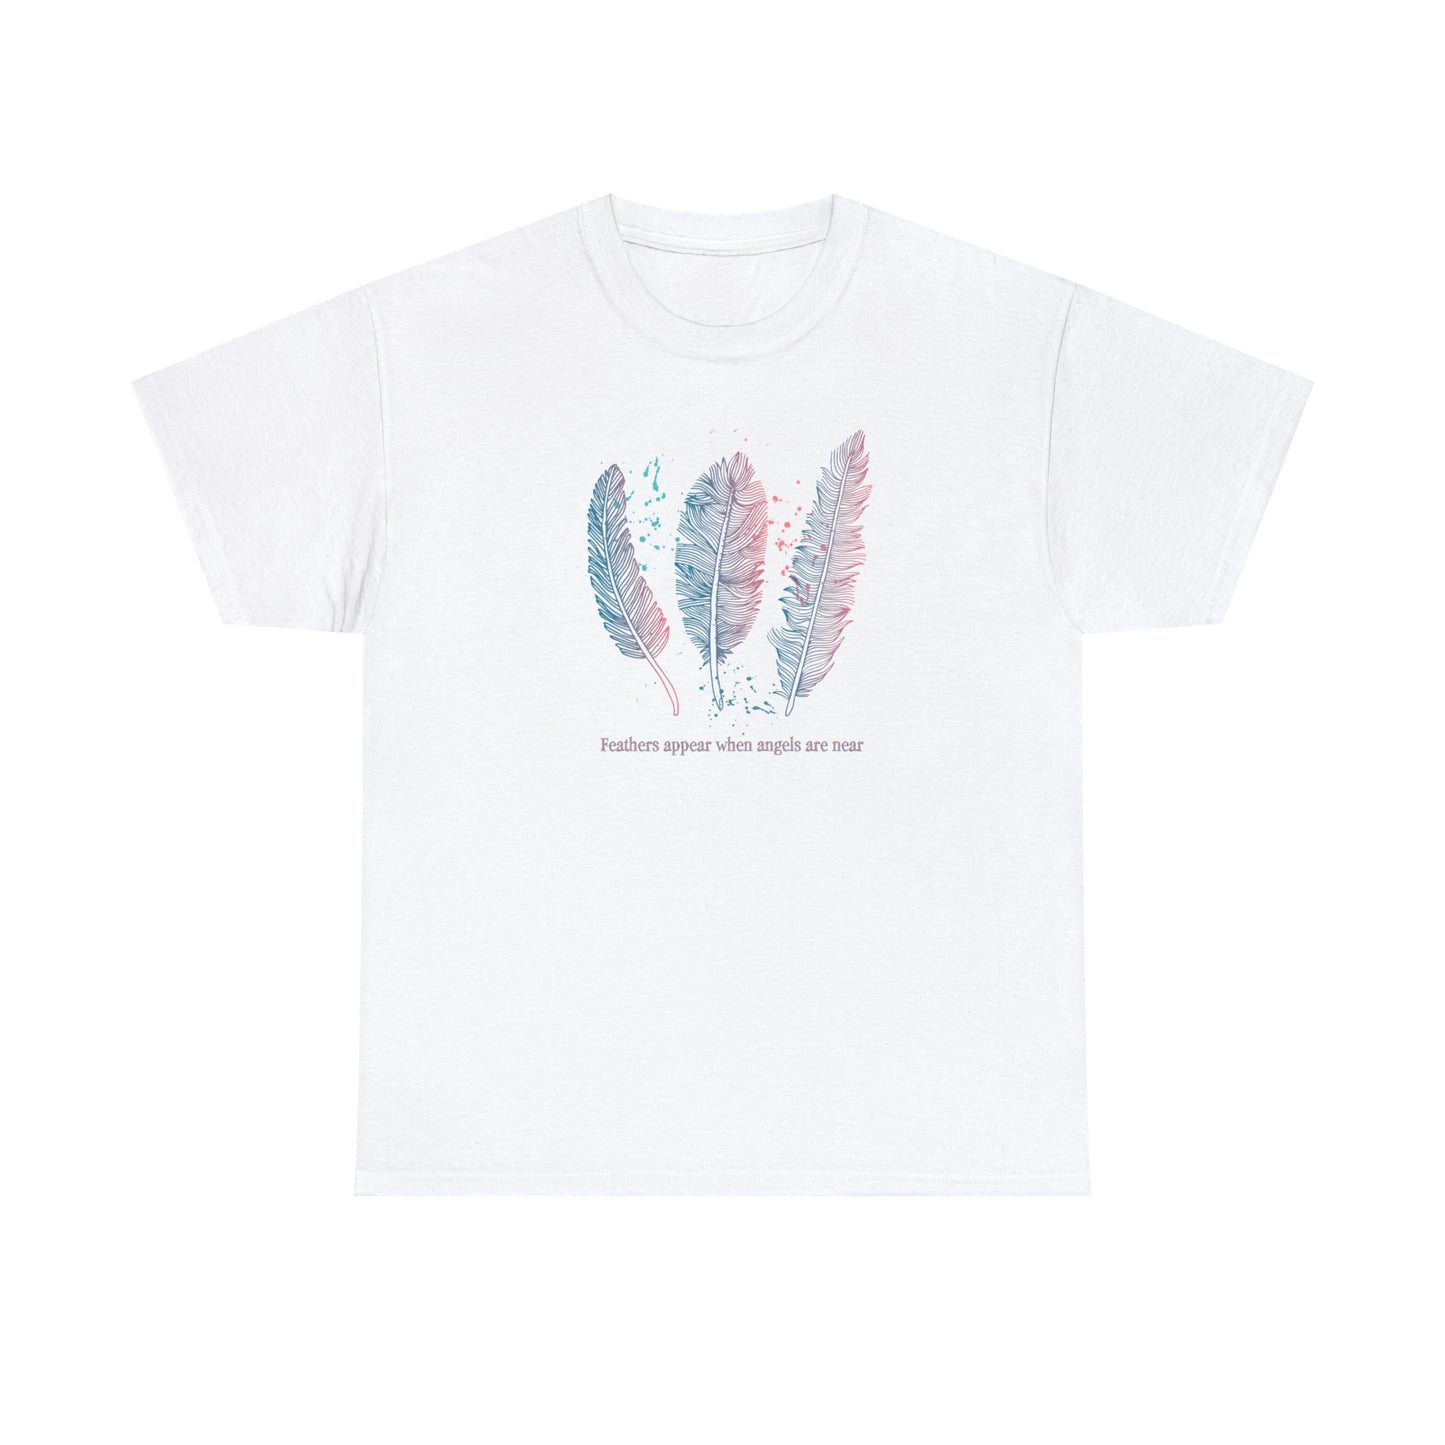 Angel T-Shirt For Sentimental TShirt For Thoughtful Shirt For Spiritual T-Shirt For Woman Shirt With Feathers T Shirt